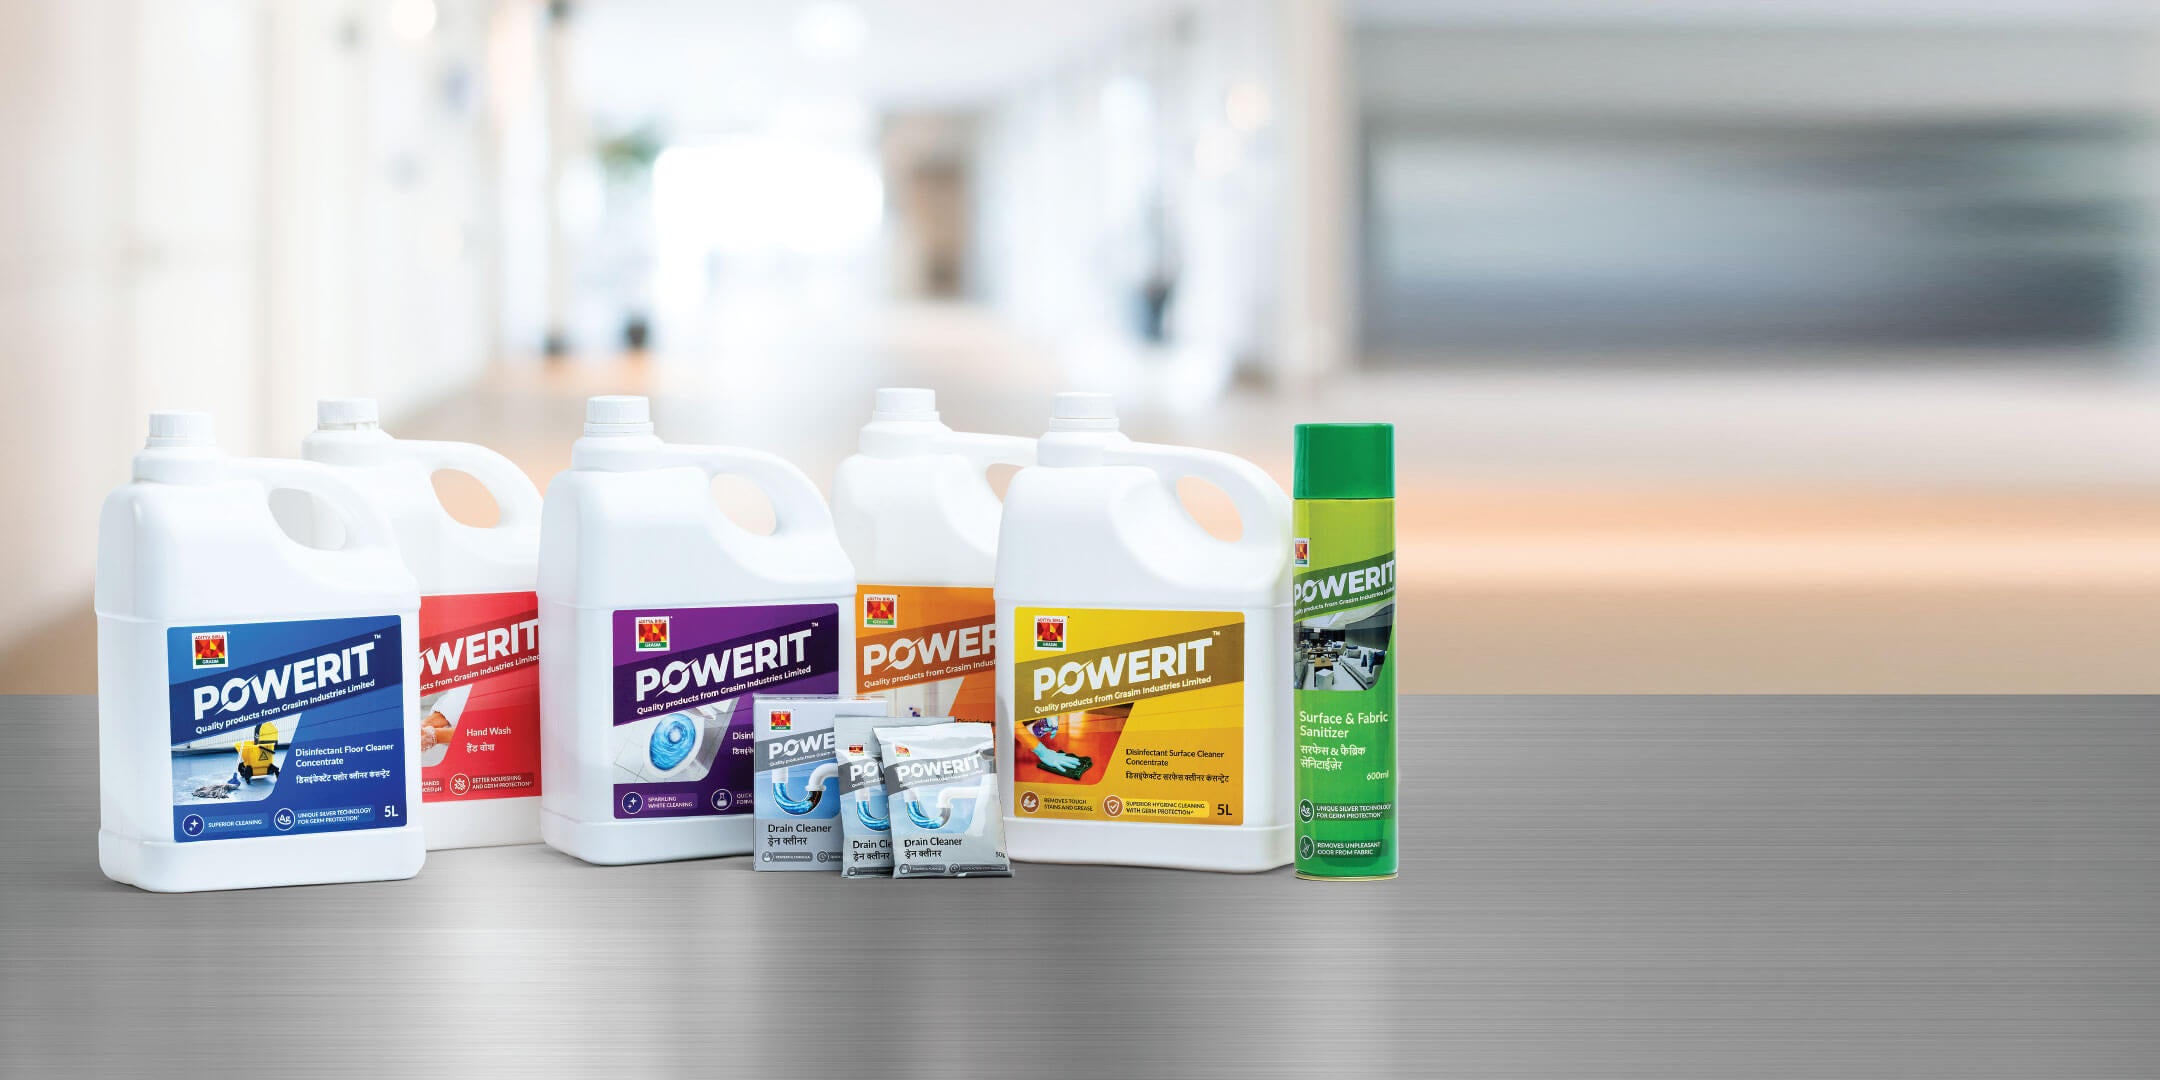 Powerit professional range of disinfectants and cleaning chemicals